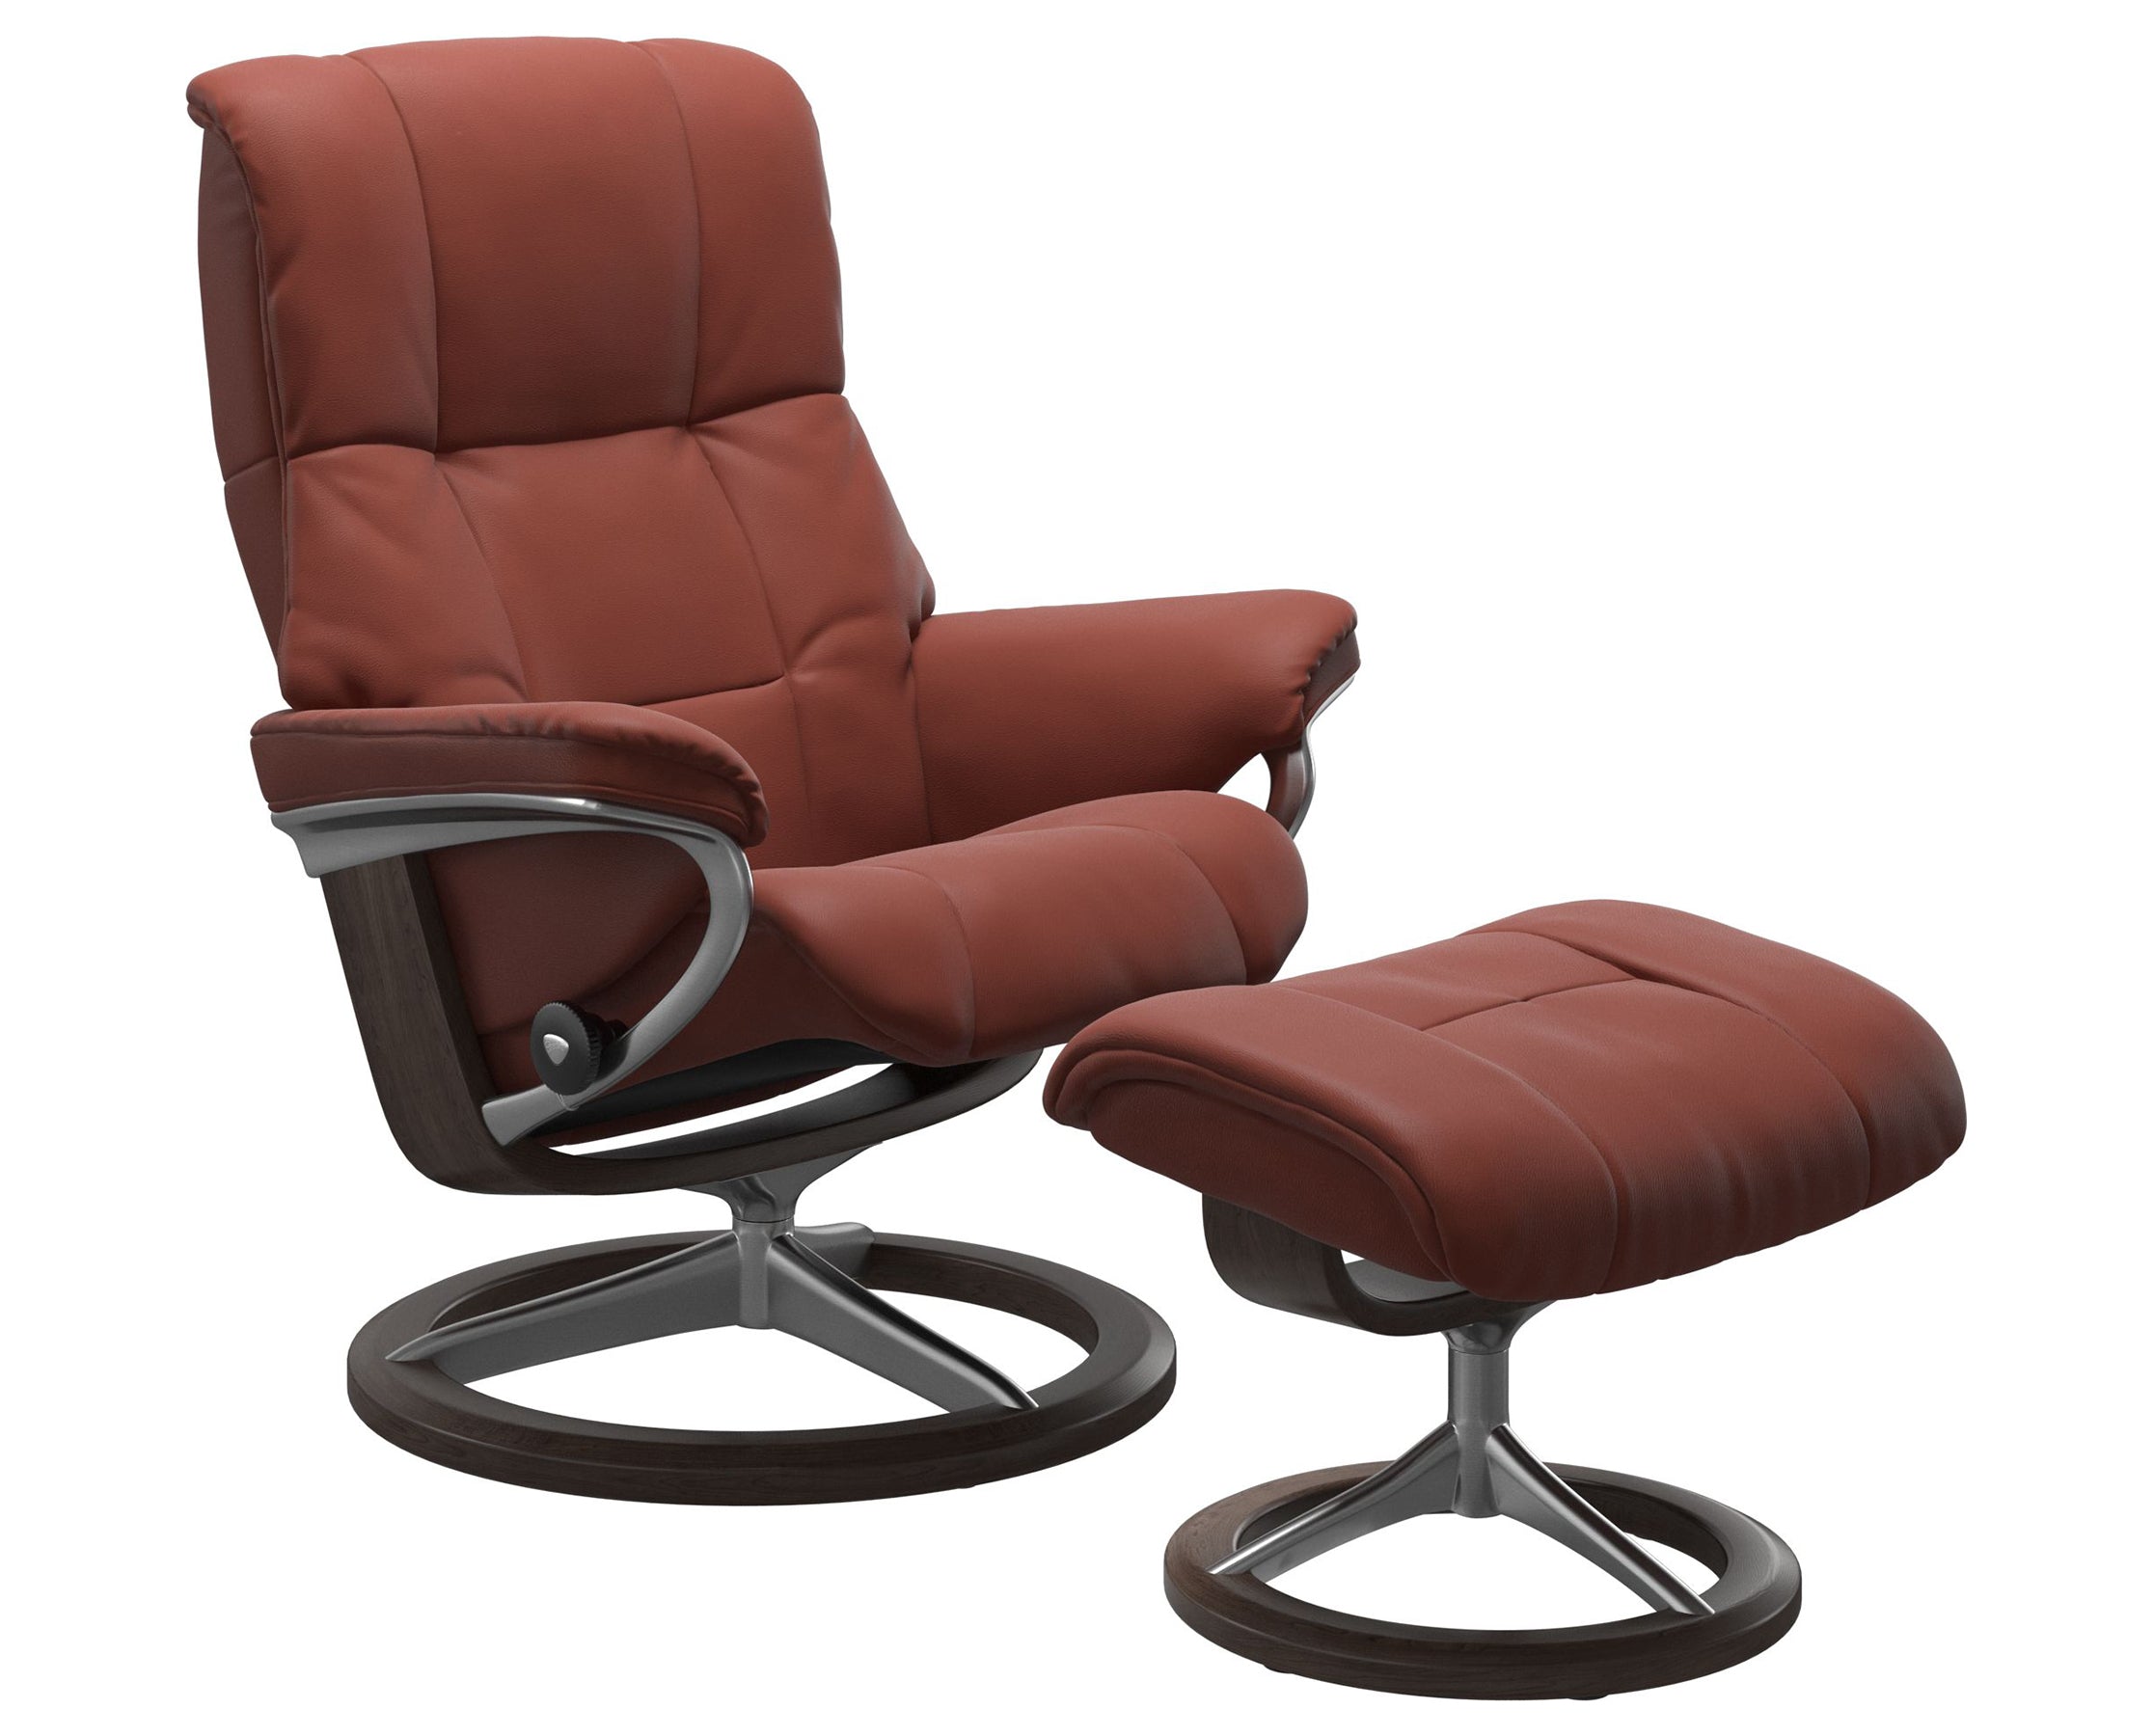 Paloma Leather Dark Henna S/M/L and Wenge Base | Stressless Mayfair Signature Recliner | Valley Ridge Furniture